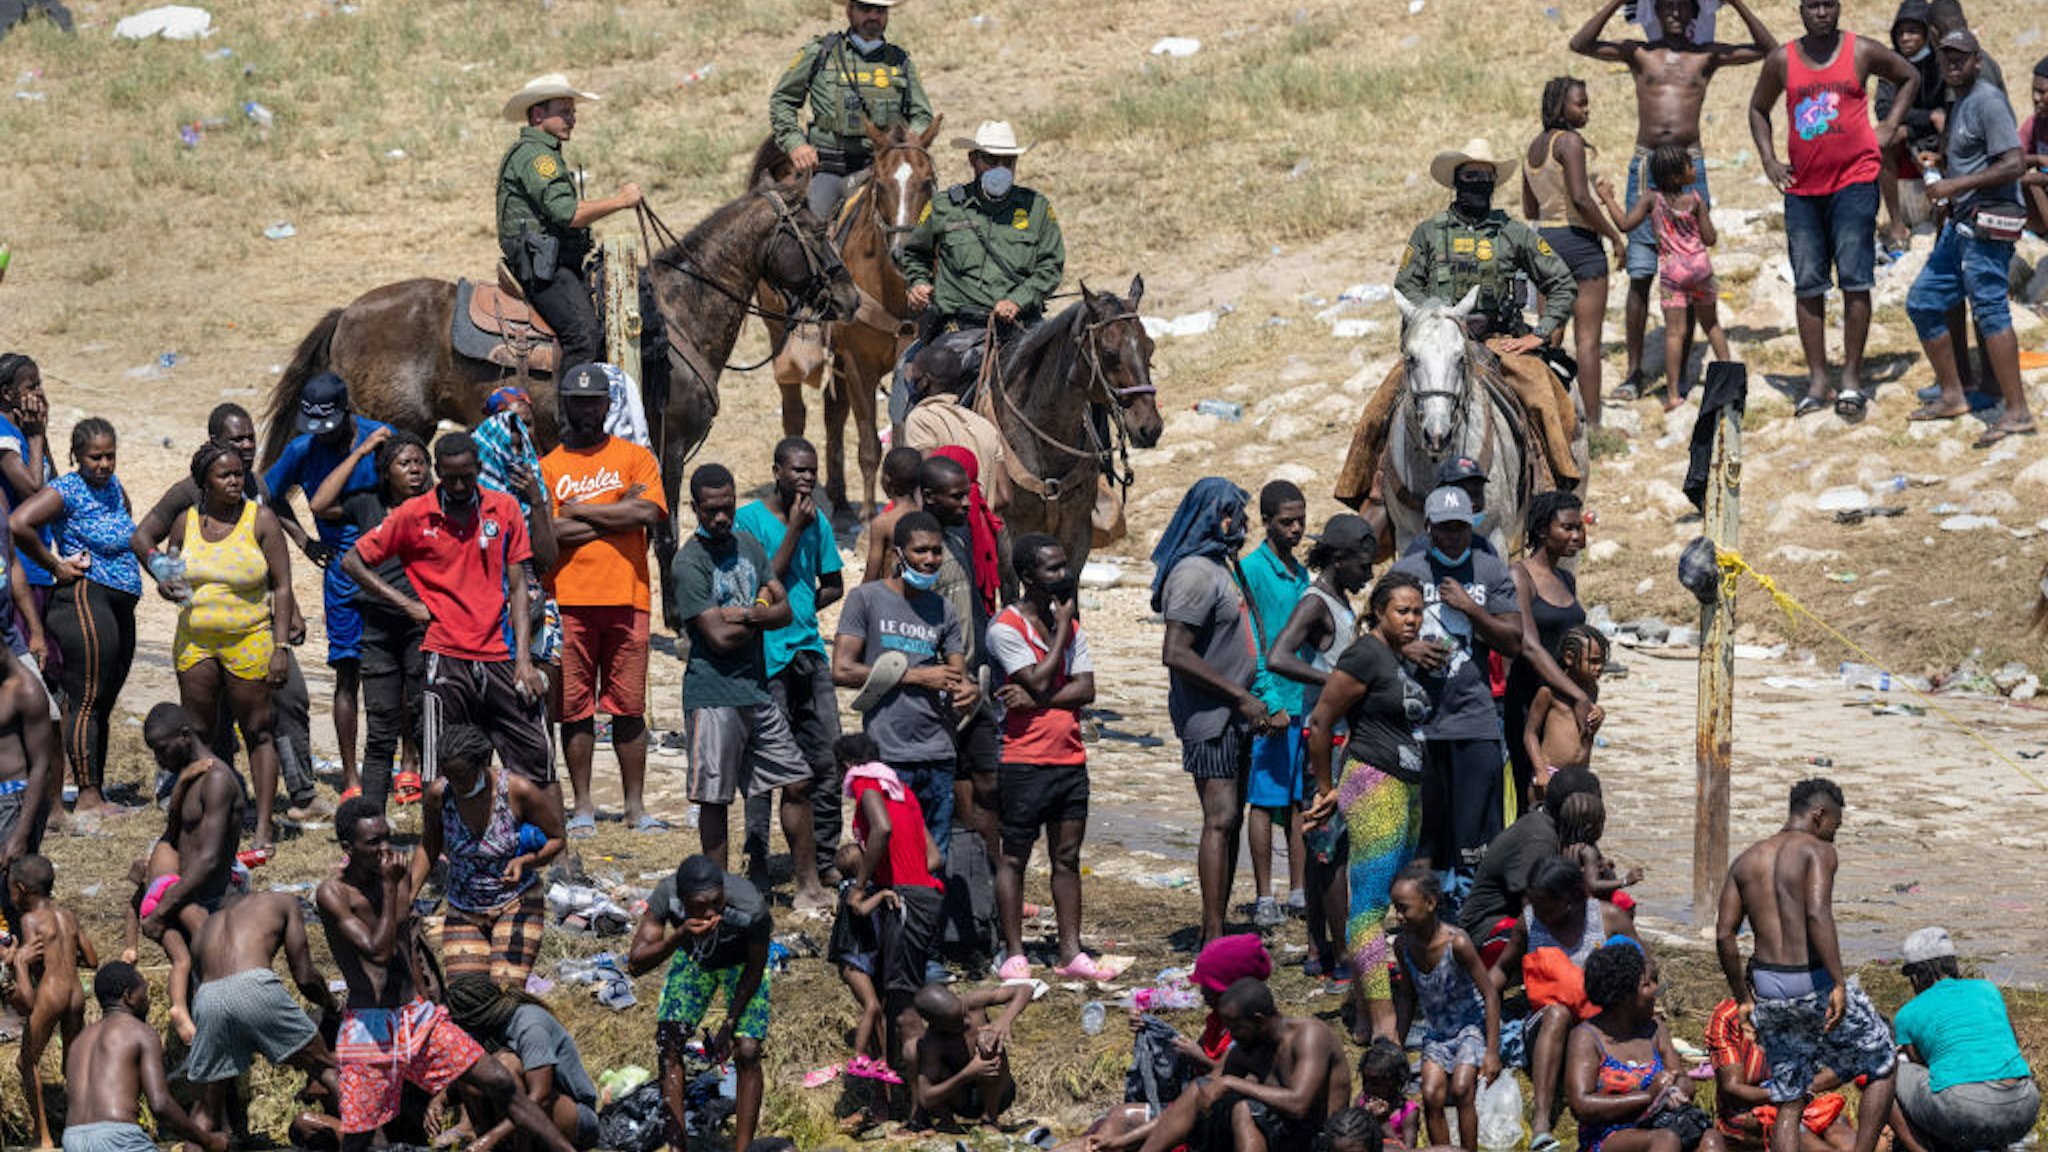 CIUDAD ACUNA, MEXICO - SEPTEMBER 20: Mounted U.S. Border Patrol agents watch Haitian immigrants on the bank of the Rio Grande in Del Rio, Texas on September 20, 2021 as seen from Ciudad Acuna, Mexico. As U.S. immigration authorities began deporting immigrants back to Haiti from Del Rio, thousands more waited in a camp under an international bridge in Del Rio while others crossed the river back into Mexico to avoid deportation. (Photo by John Moore/Getty Images)